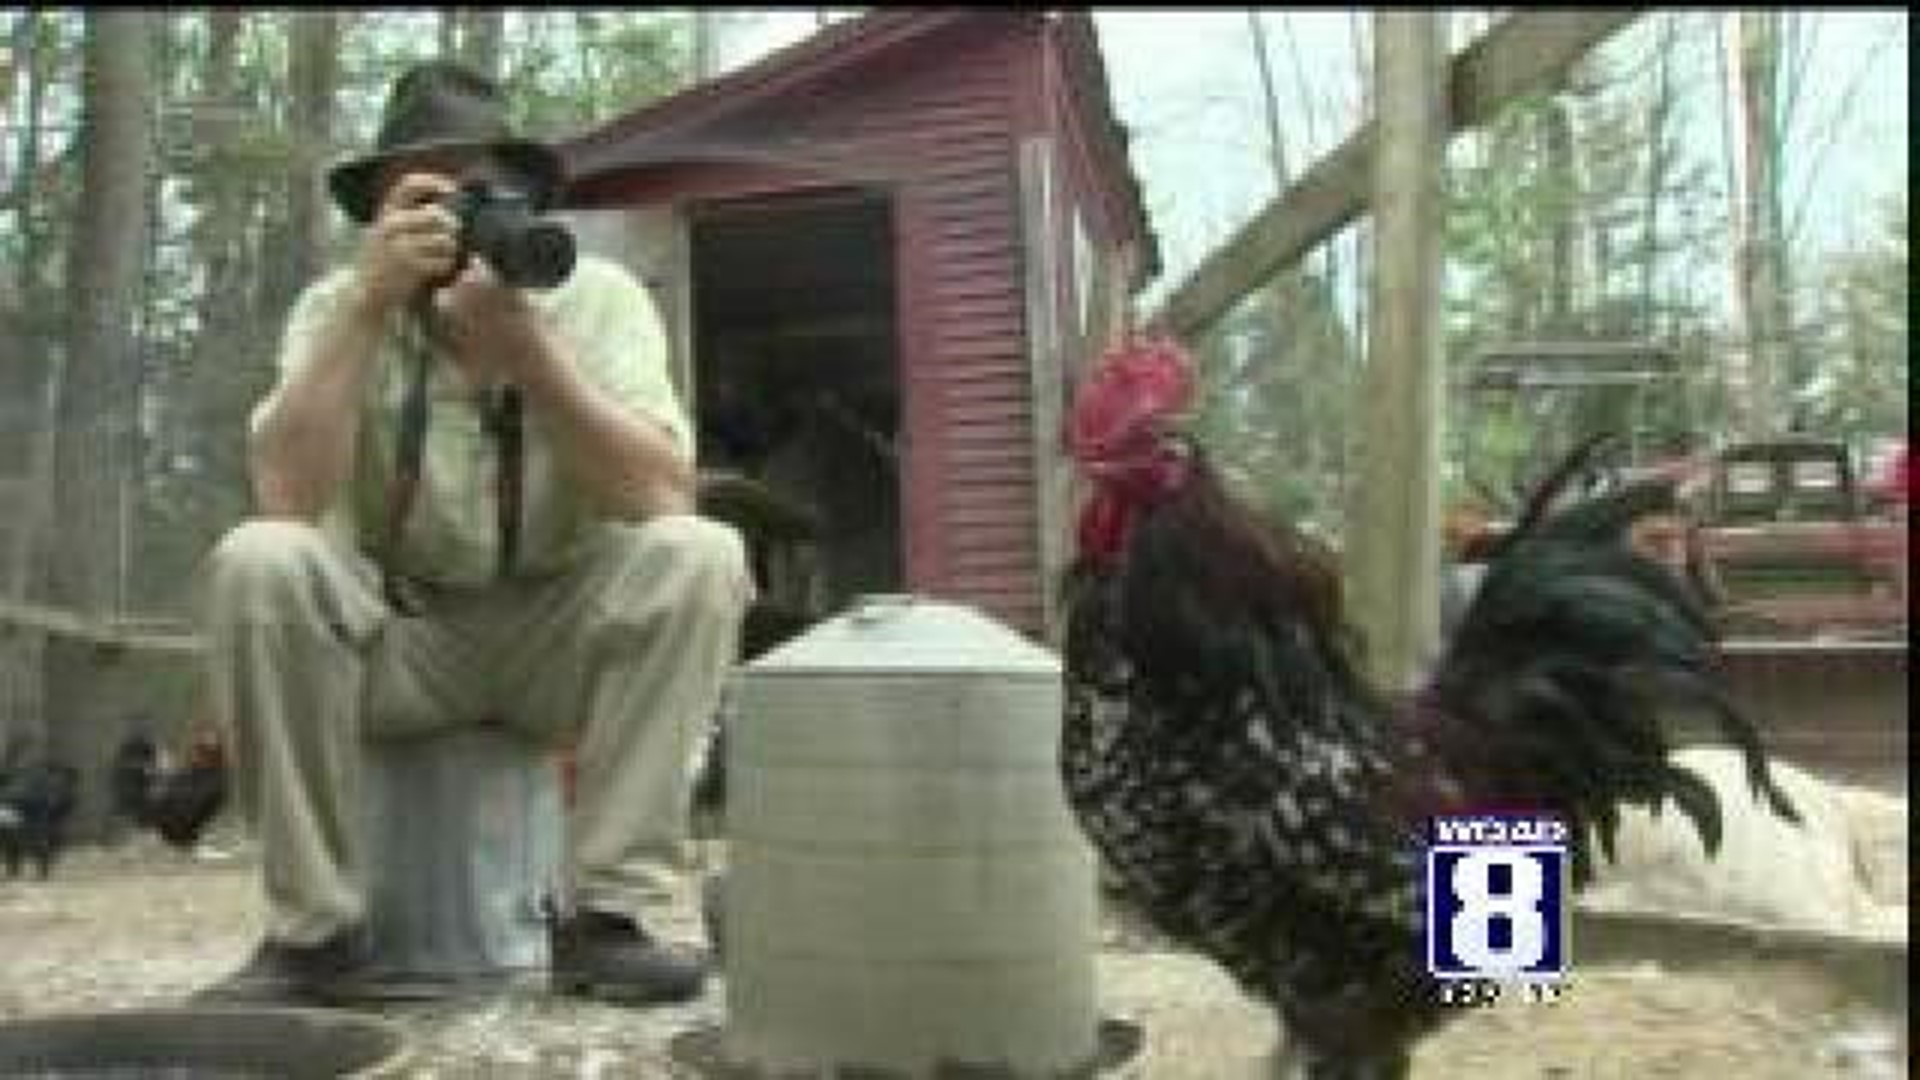 Photographer with chicken models